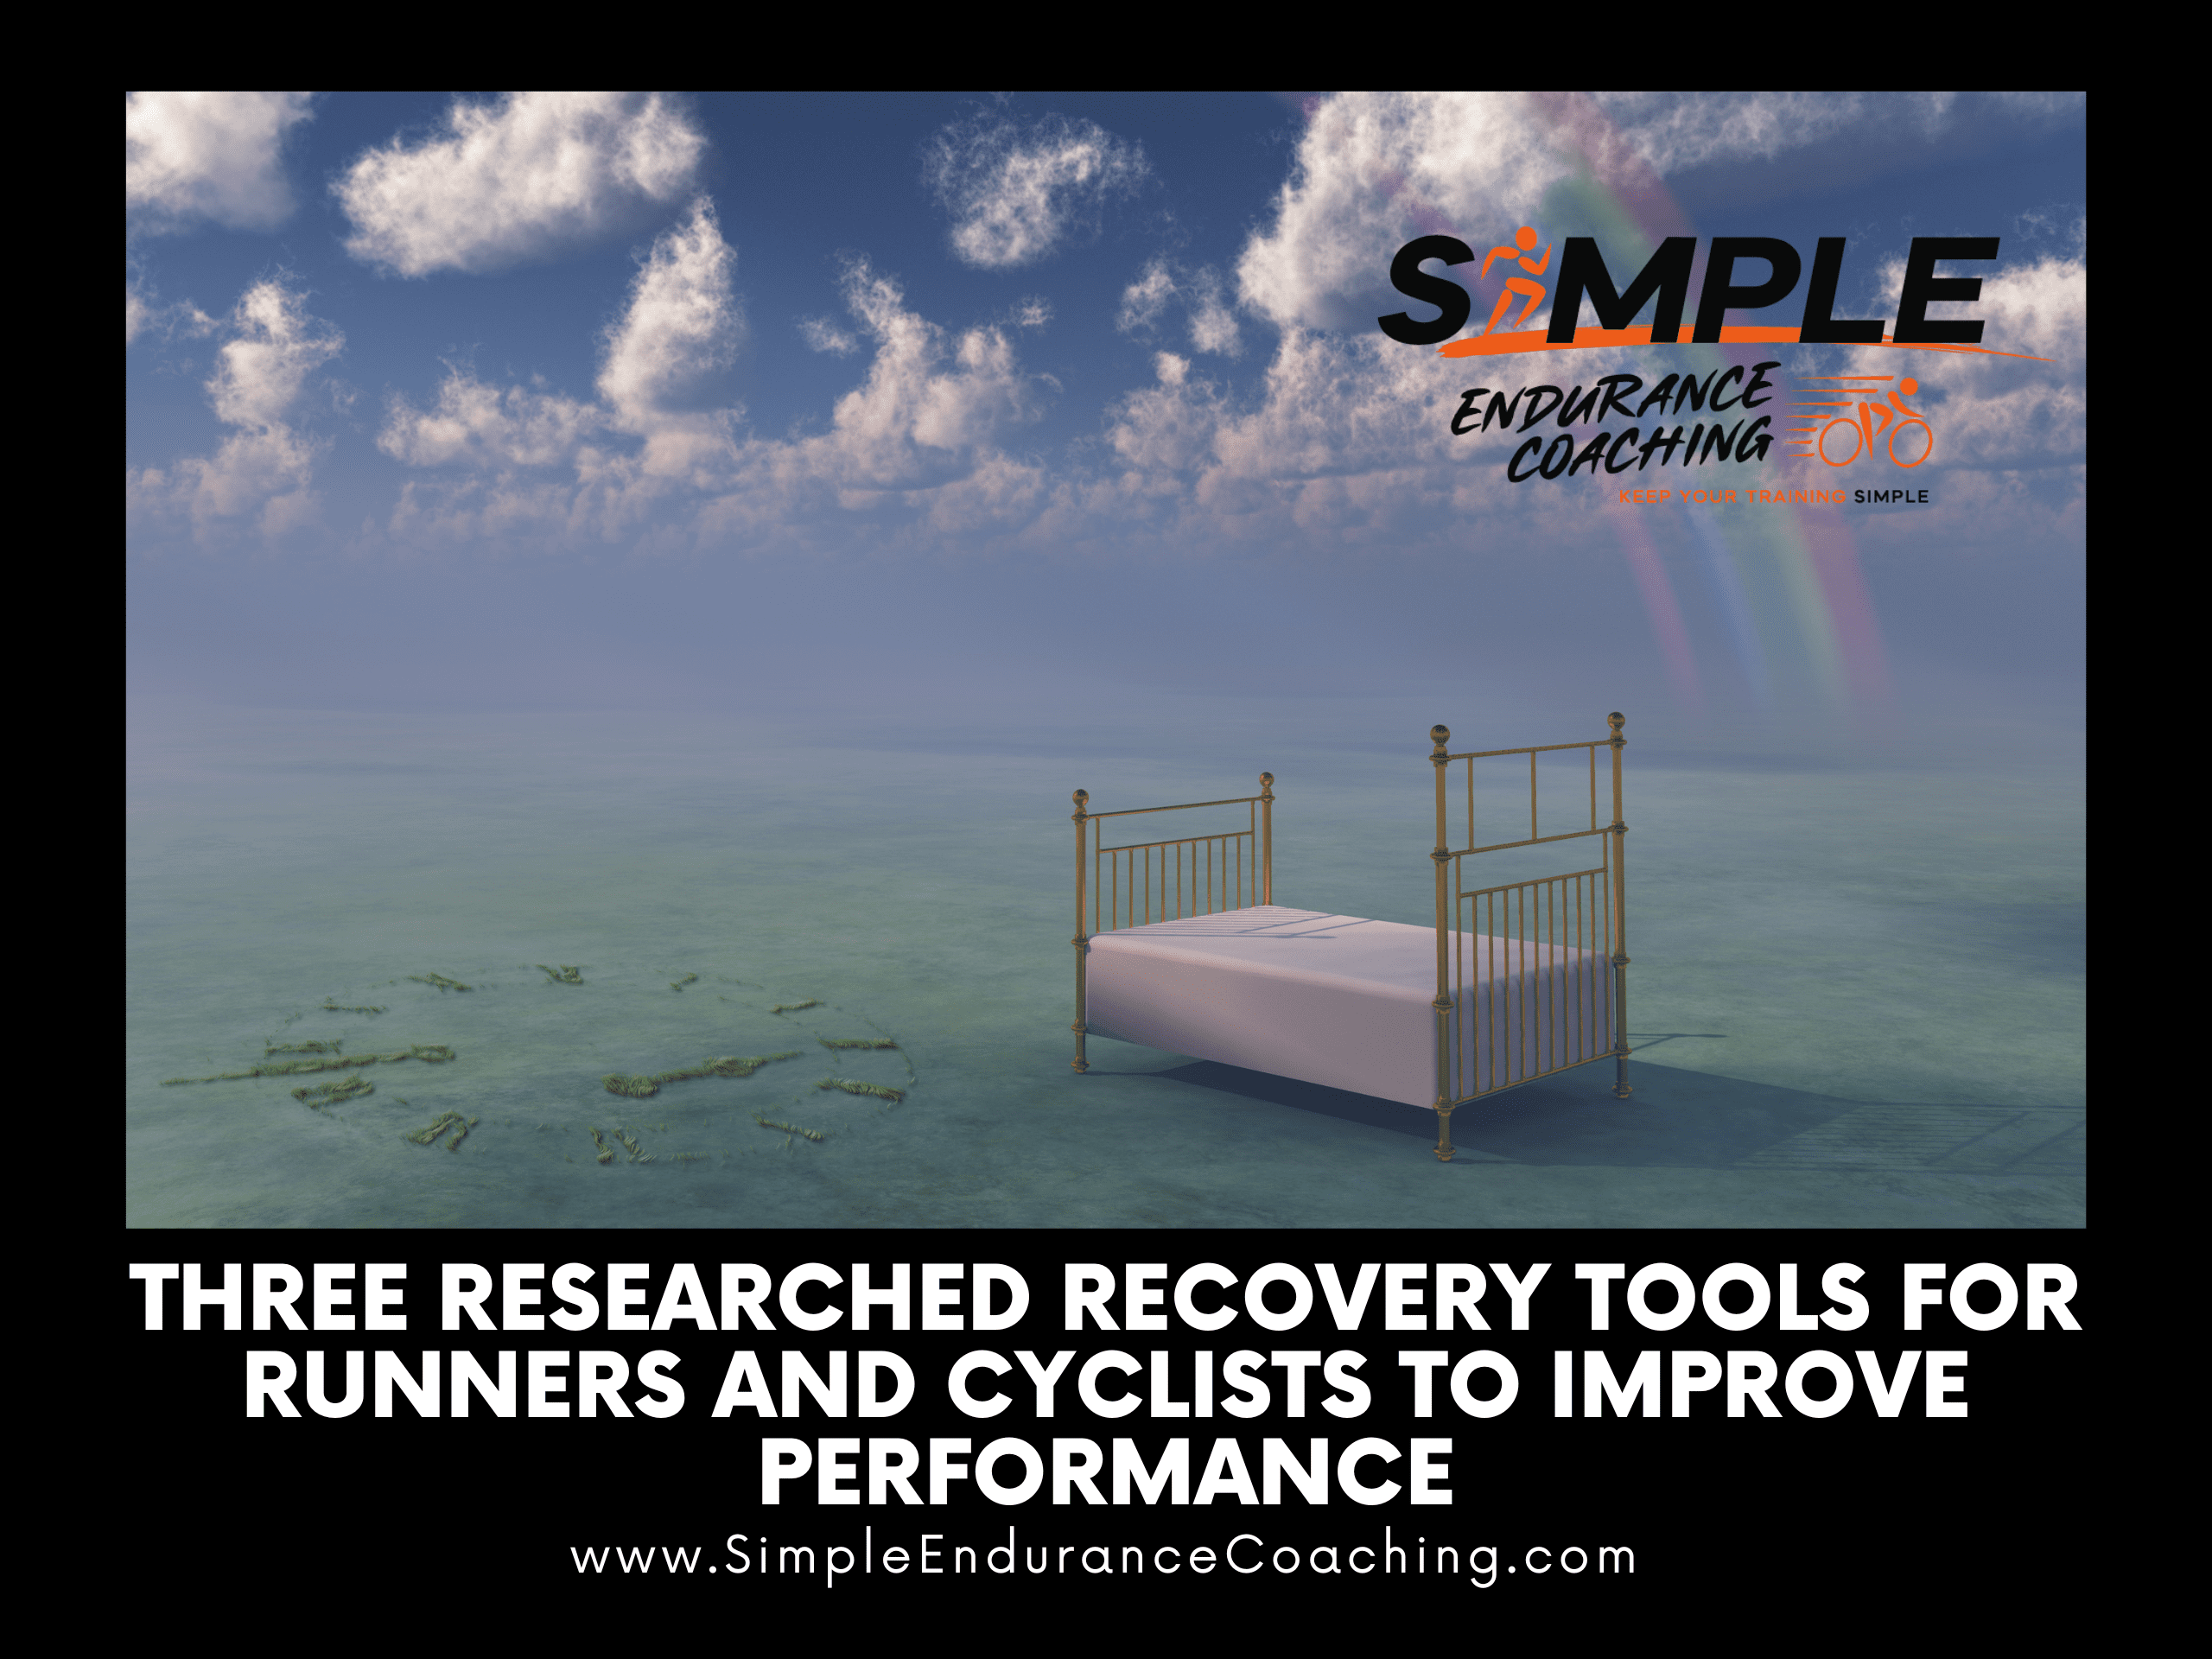 Three researched recovery tools for cyclists and runners to improve performance